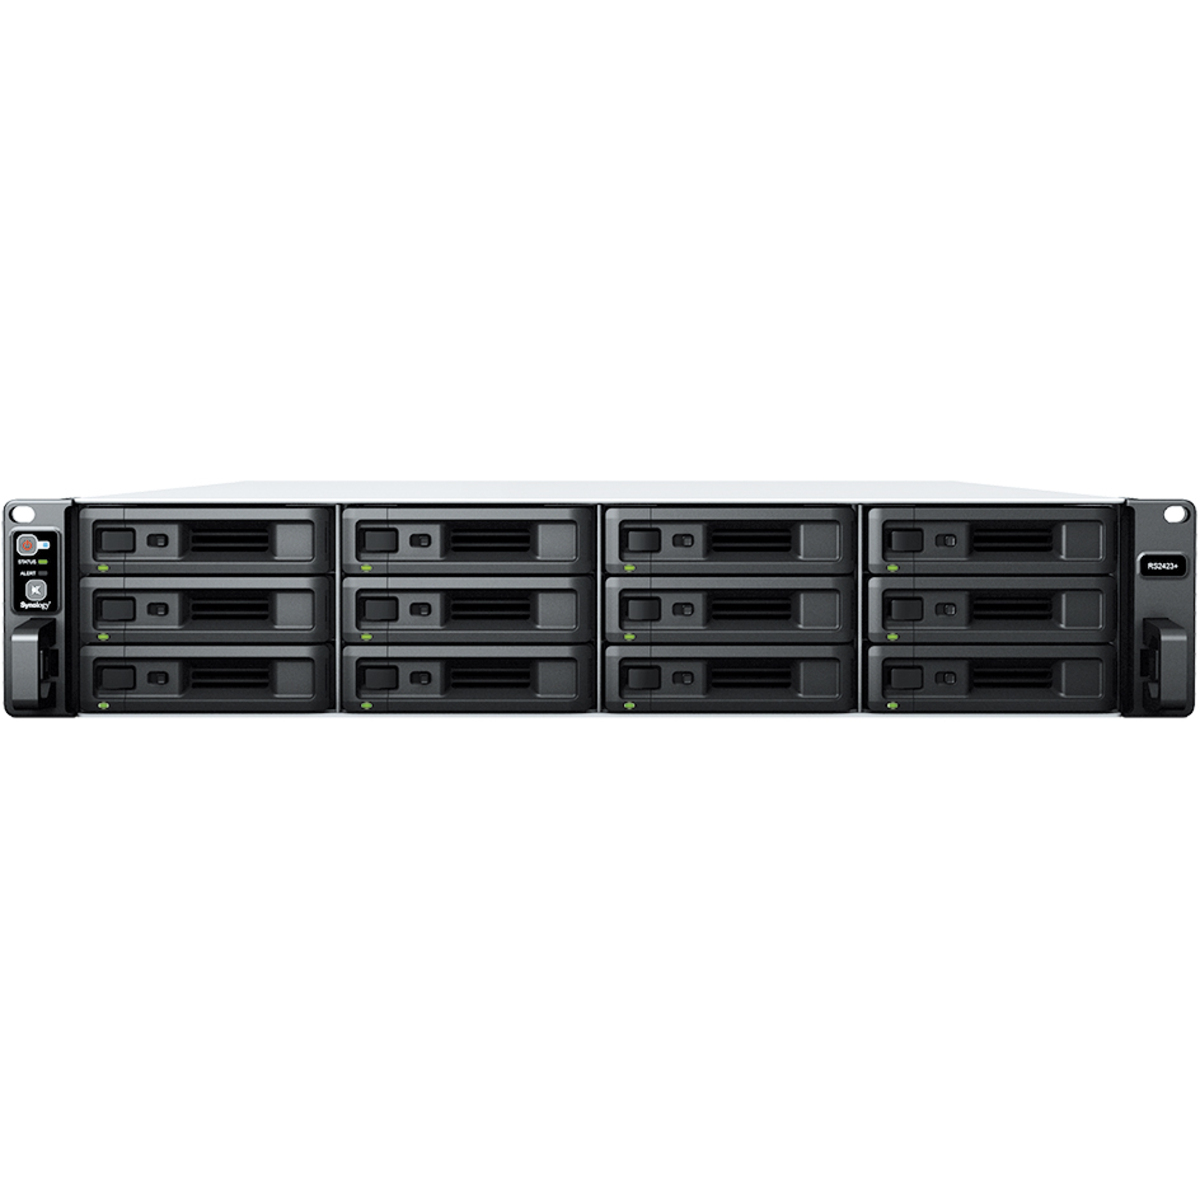 Synology RackStation RS2423+ 70tb 12-Bay RackMount Multimedia / Power User / Business NAS - Network Attached Storage Device 10x7tb Synology SAT5210 Series SAT5210-7000G 2.5 530/500MB/s SATA 6Gb/s SSD ENTERPRISE Class Drives Installed - Burn-In Tested RackStation RS2423+